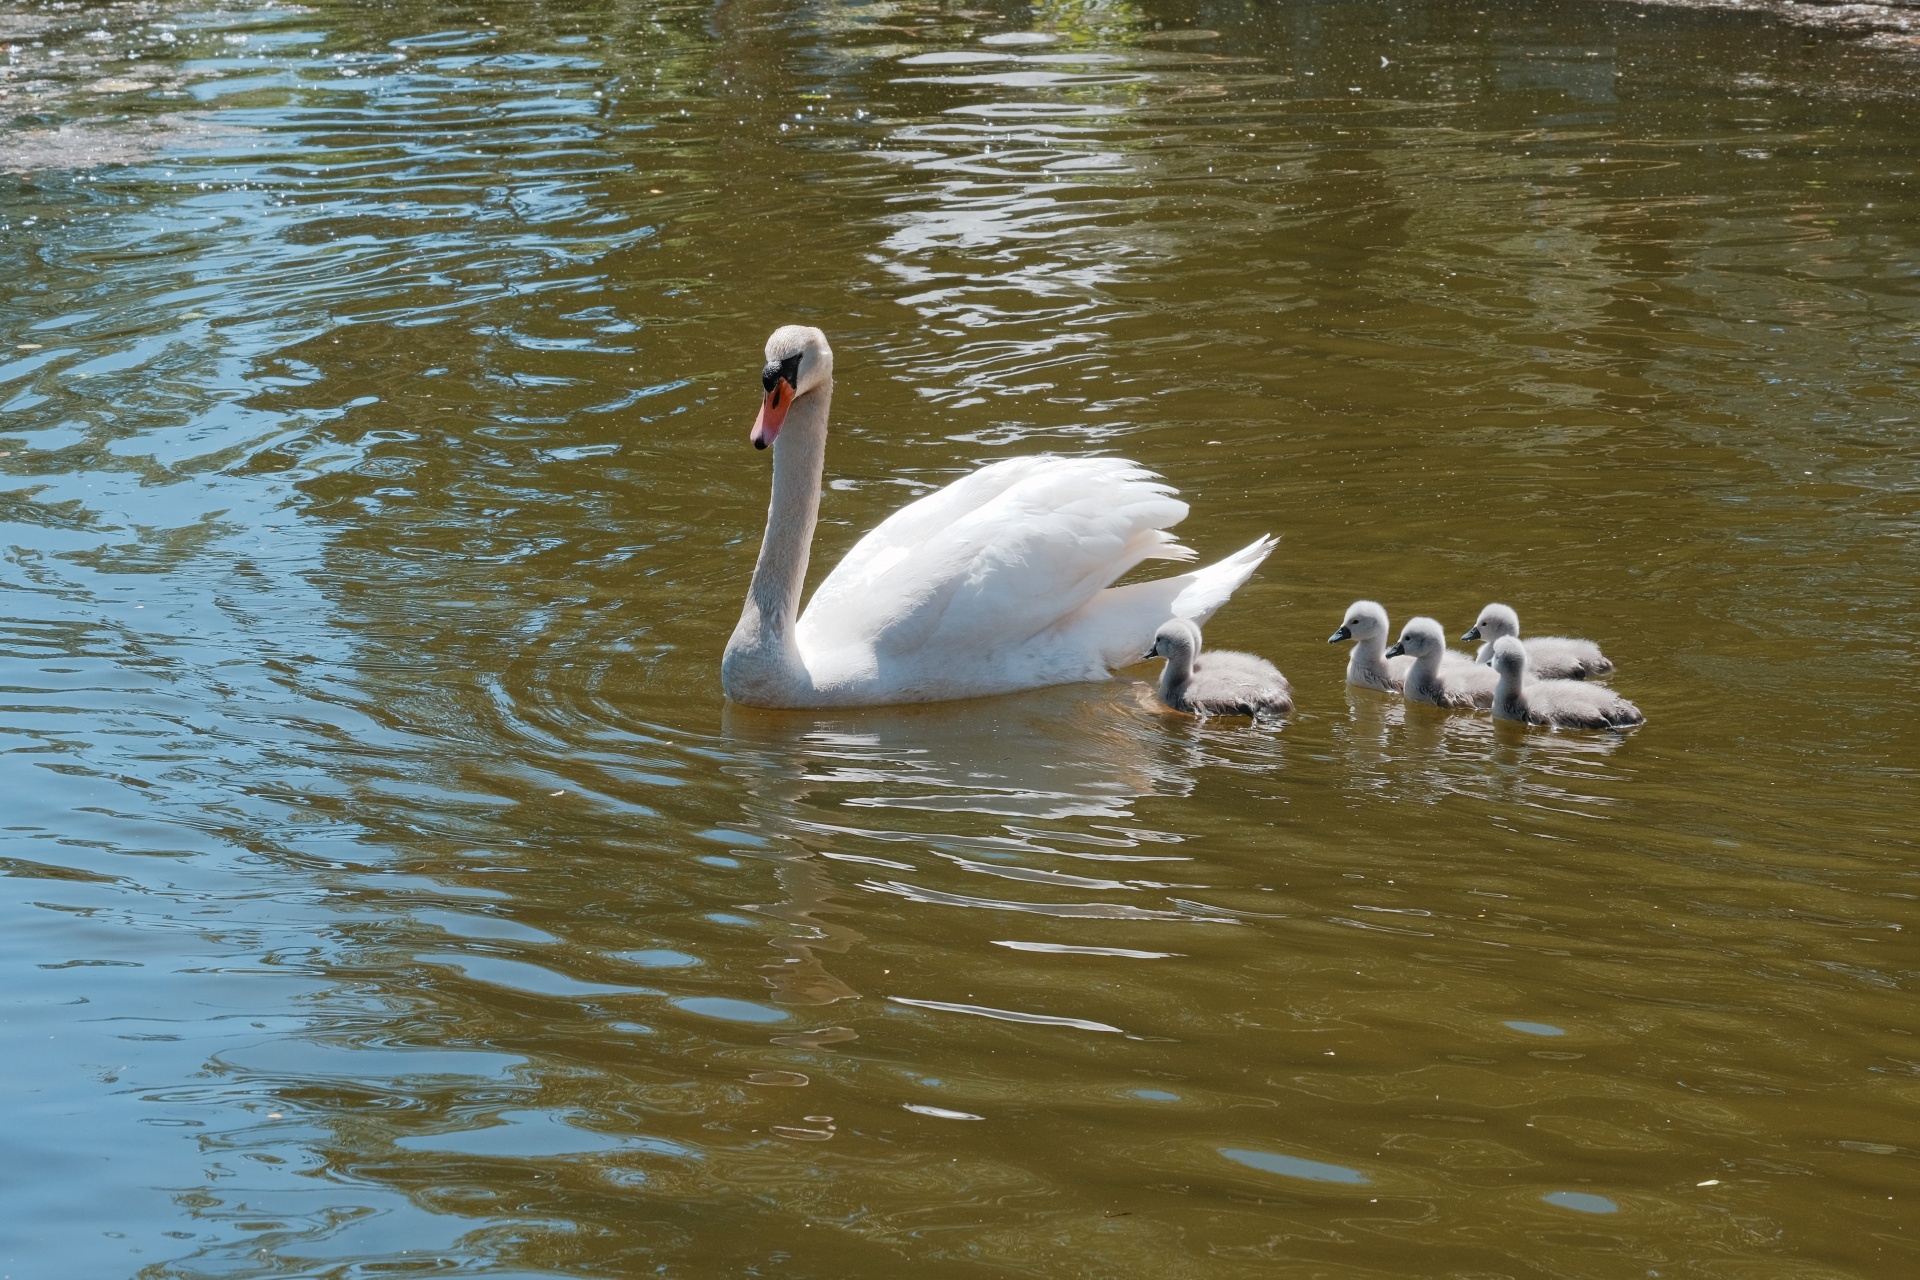 Mother Swan With Her Chicks